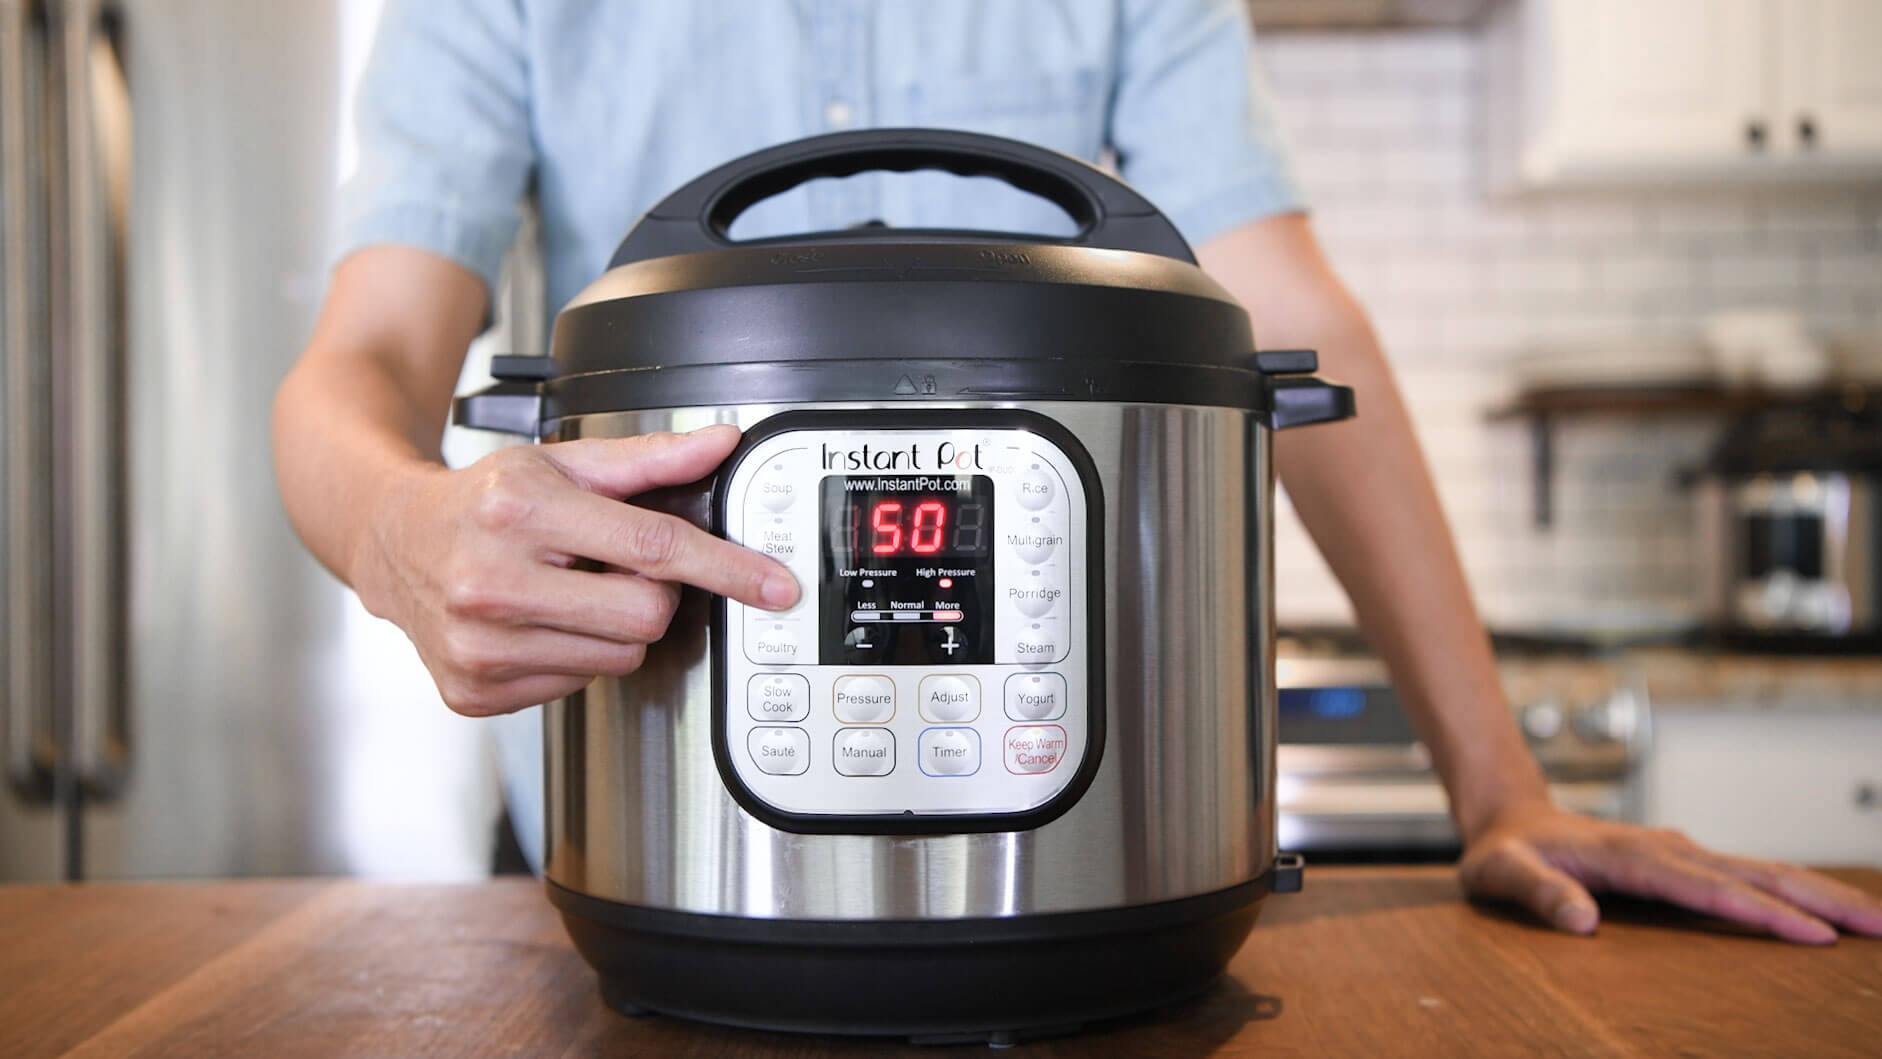 power cooker plus pressure cooker review and cooking some rice to